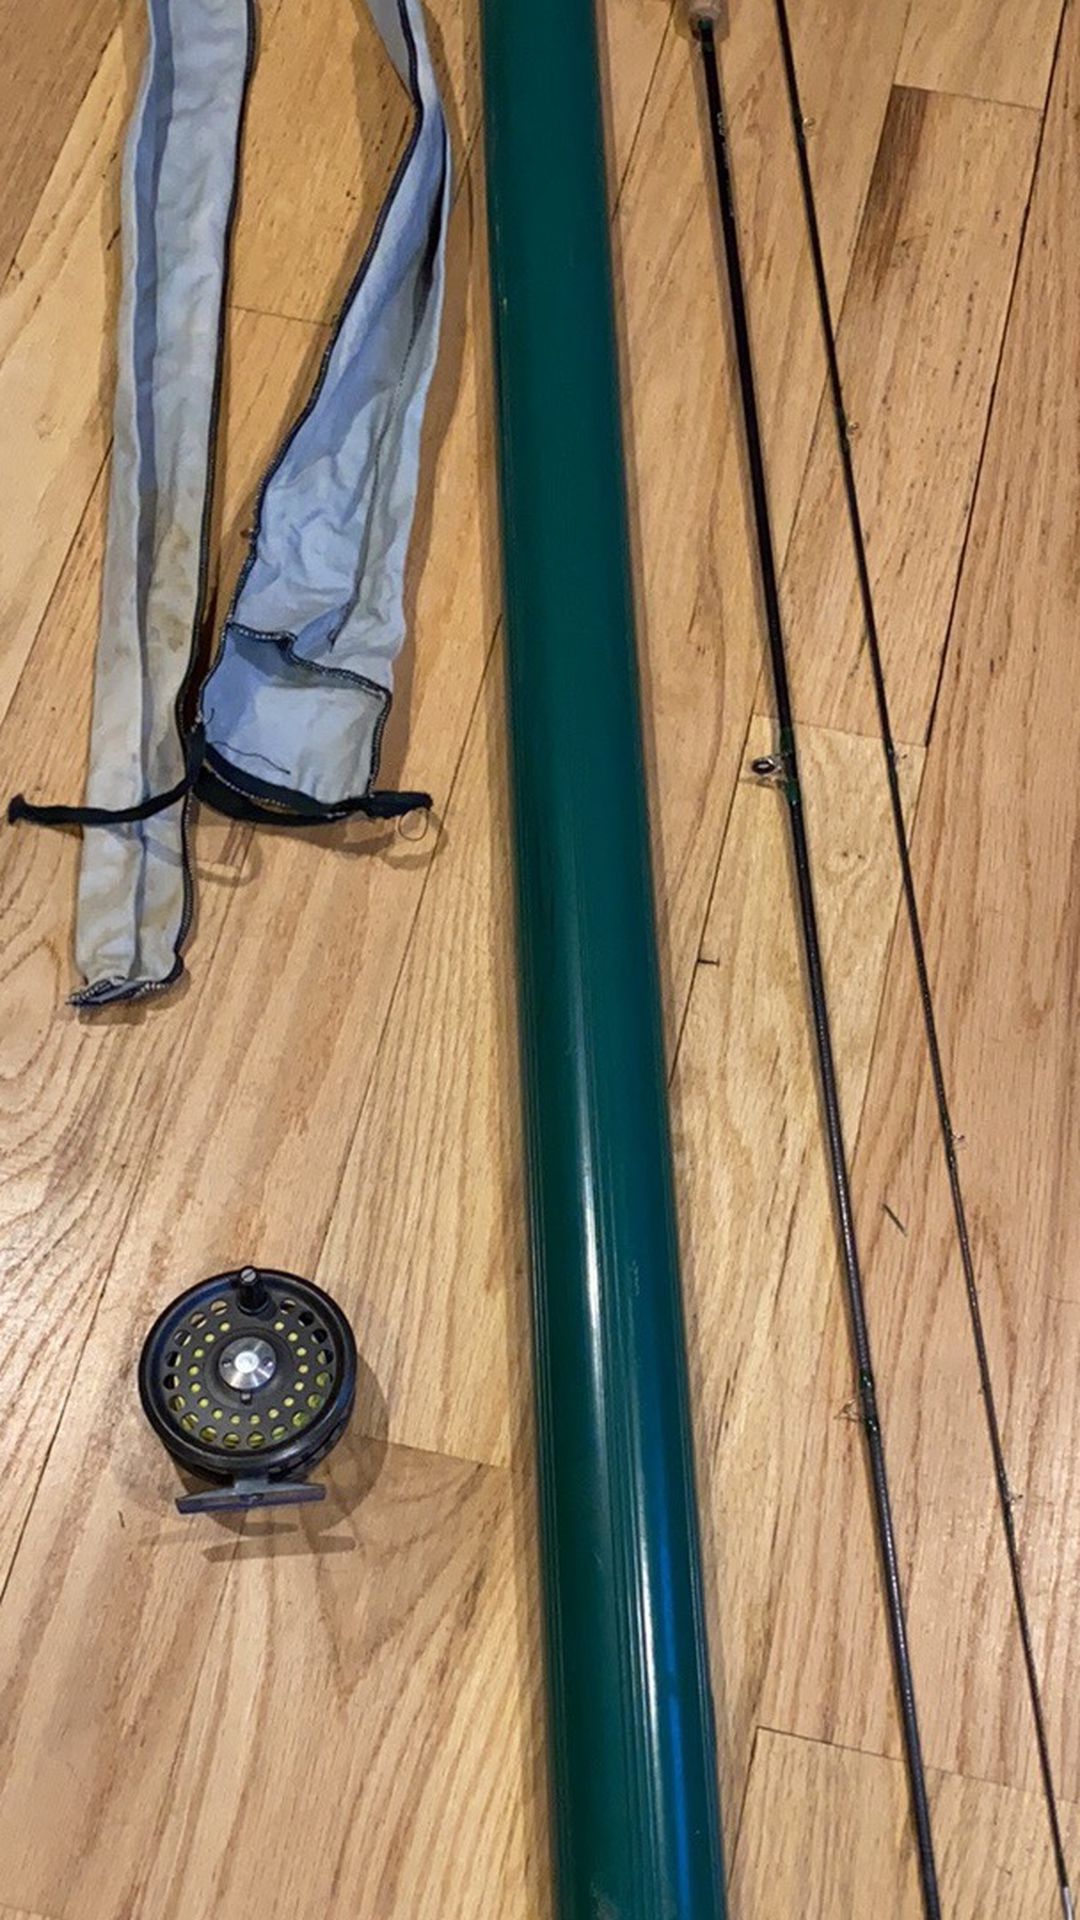 Like new Orvis graphite green mountain series rod, reel, line, rod sock and case - 8ft for 6wt line.